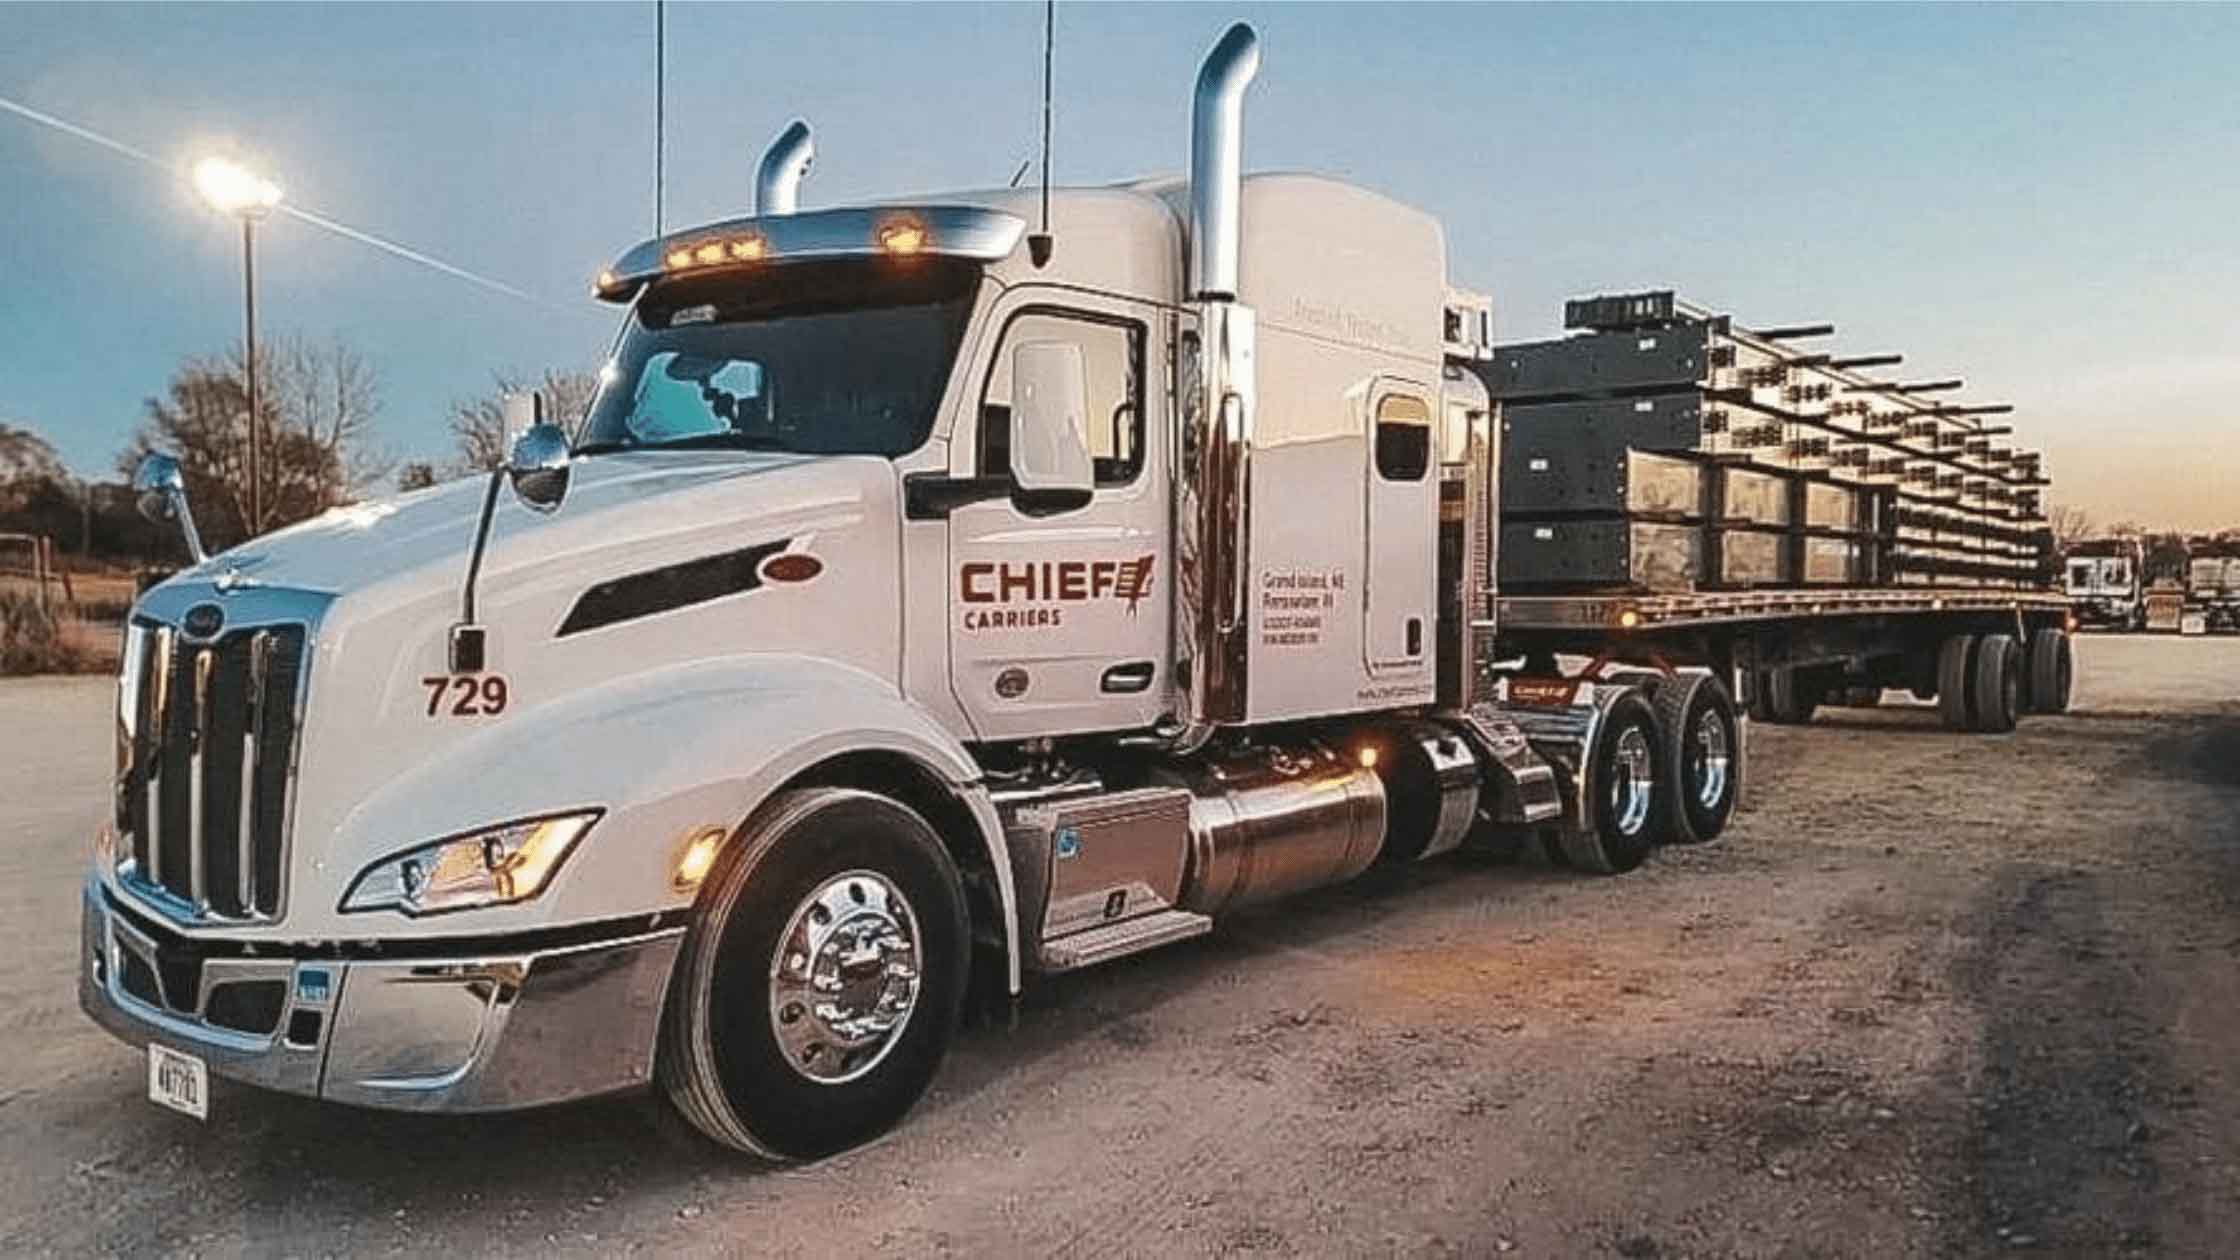 White chief carriers flatbed semi parked at dusk